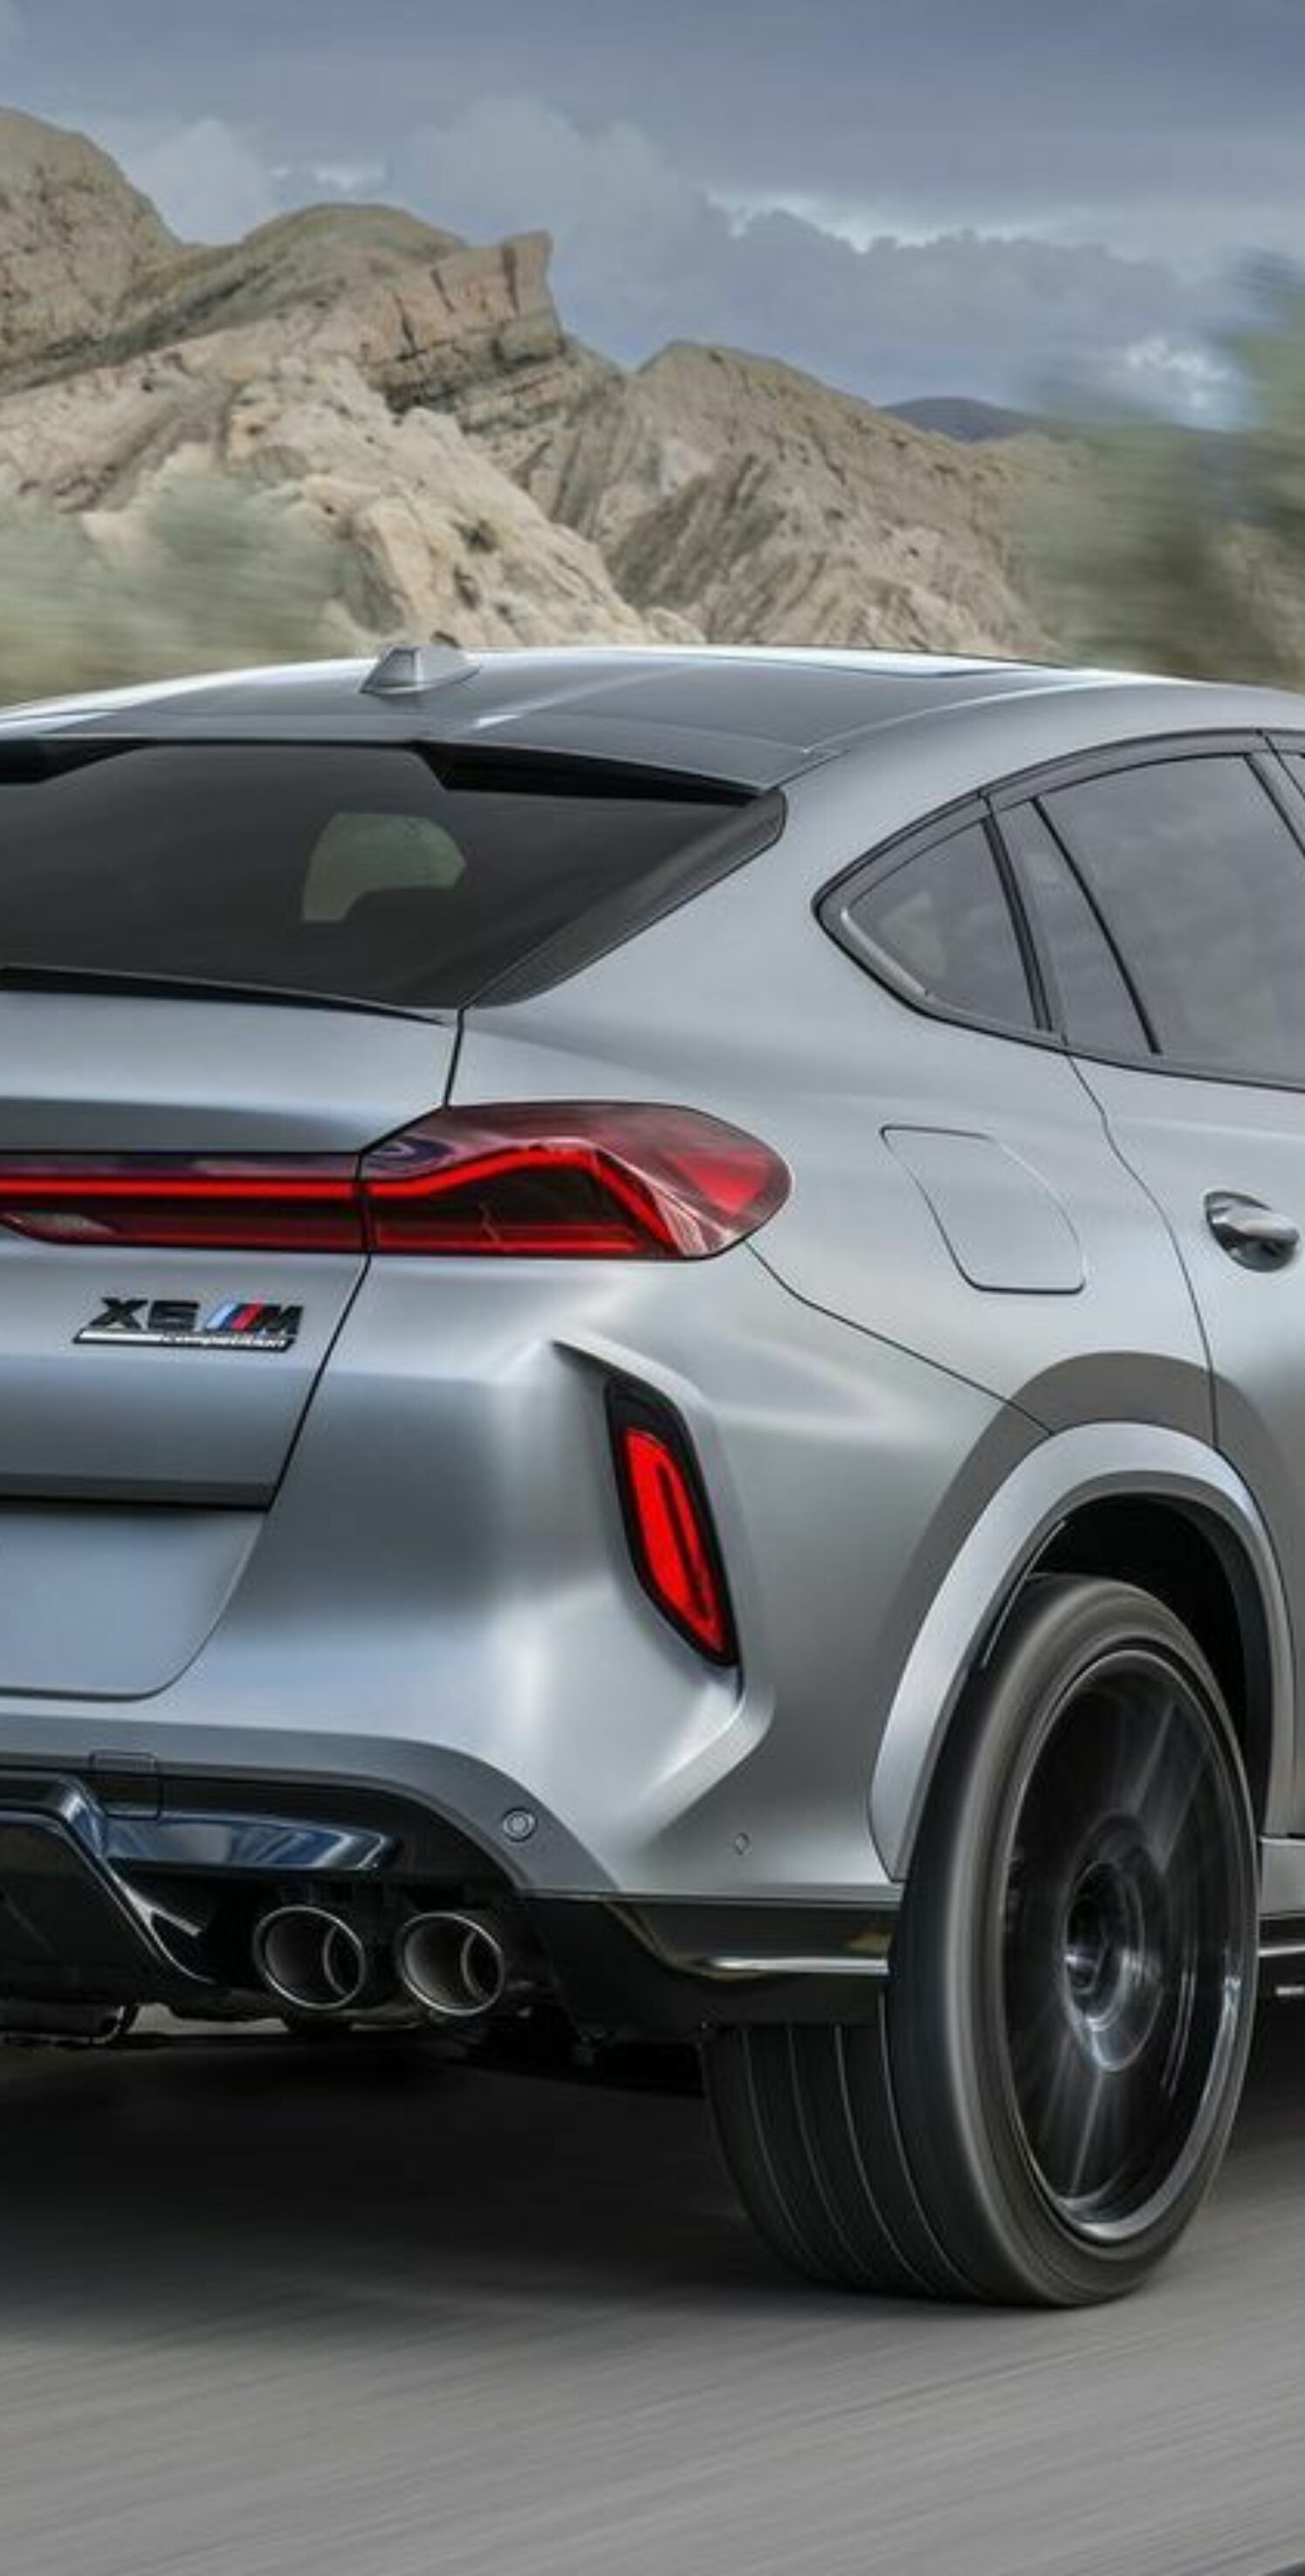 https://autofilter.sk/assets/images/x6-m-competition/gallery/bmw-x6-m-competition-5-galeria.jpg - obrazok